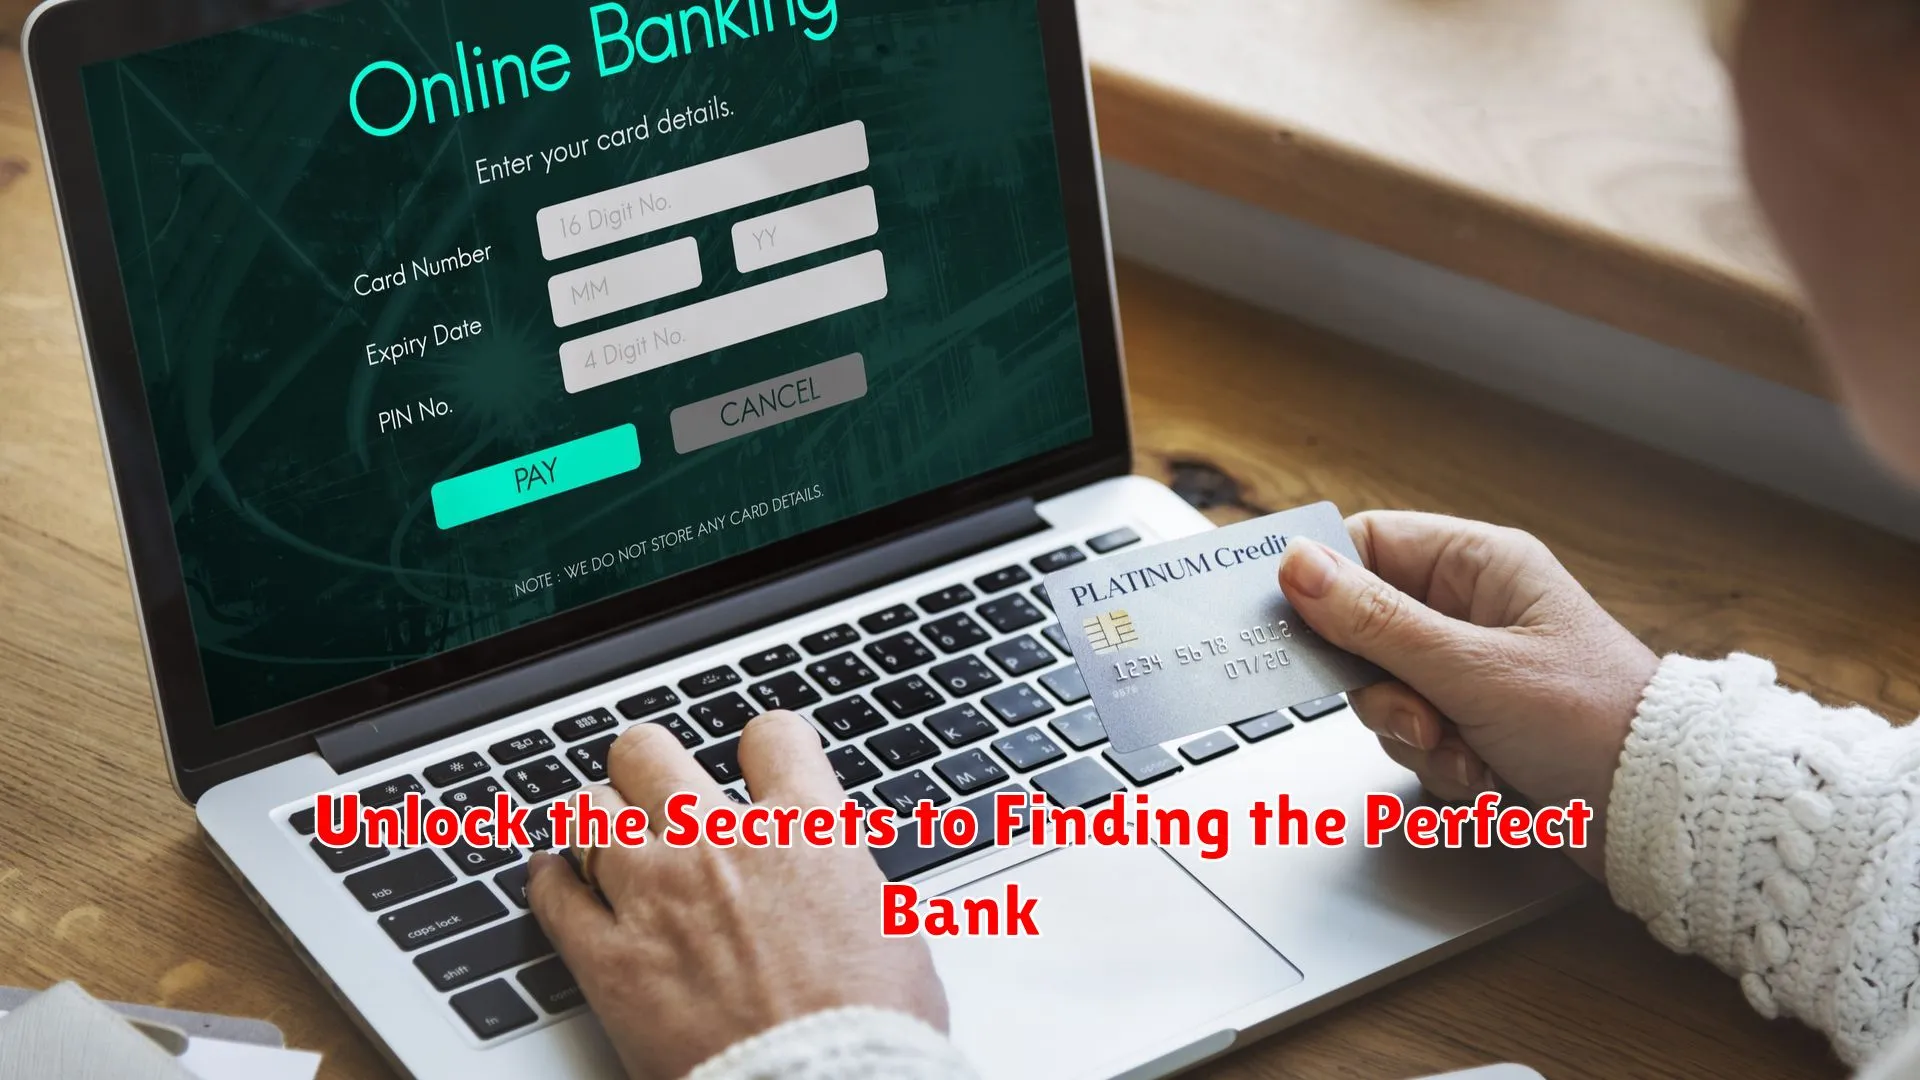 Unlock the Secrets to Finding the Perfect Bank